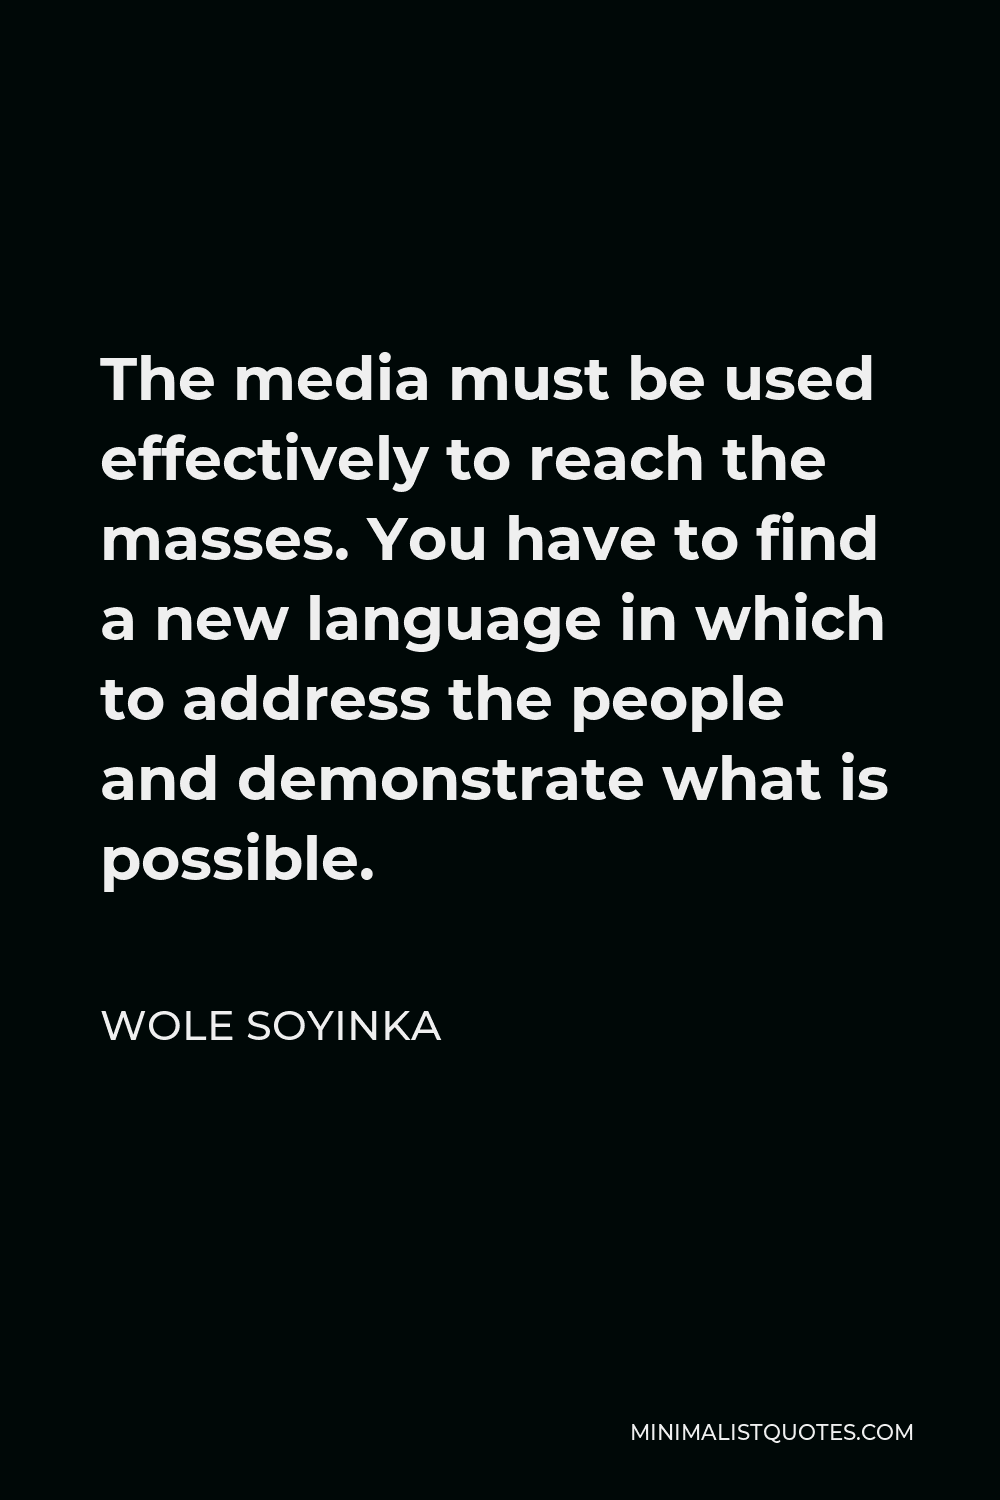 Wole Soyinka Quote - The media must be used effectively to reach the masses. You have to find a new language in which to address the people and demonstrate what is possible.